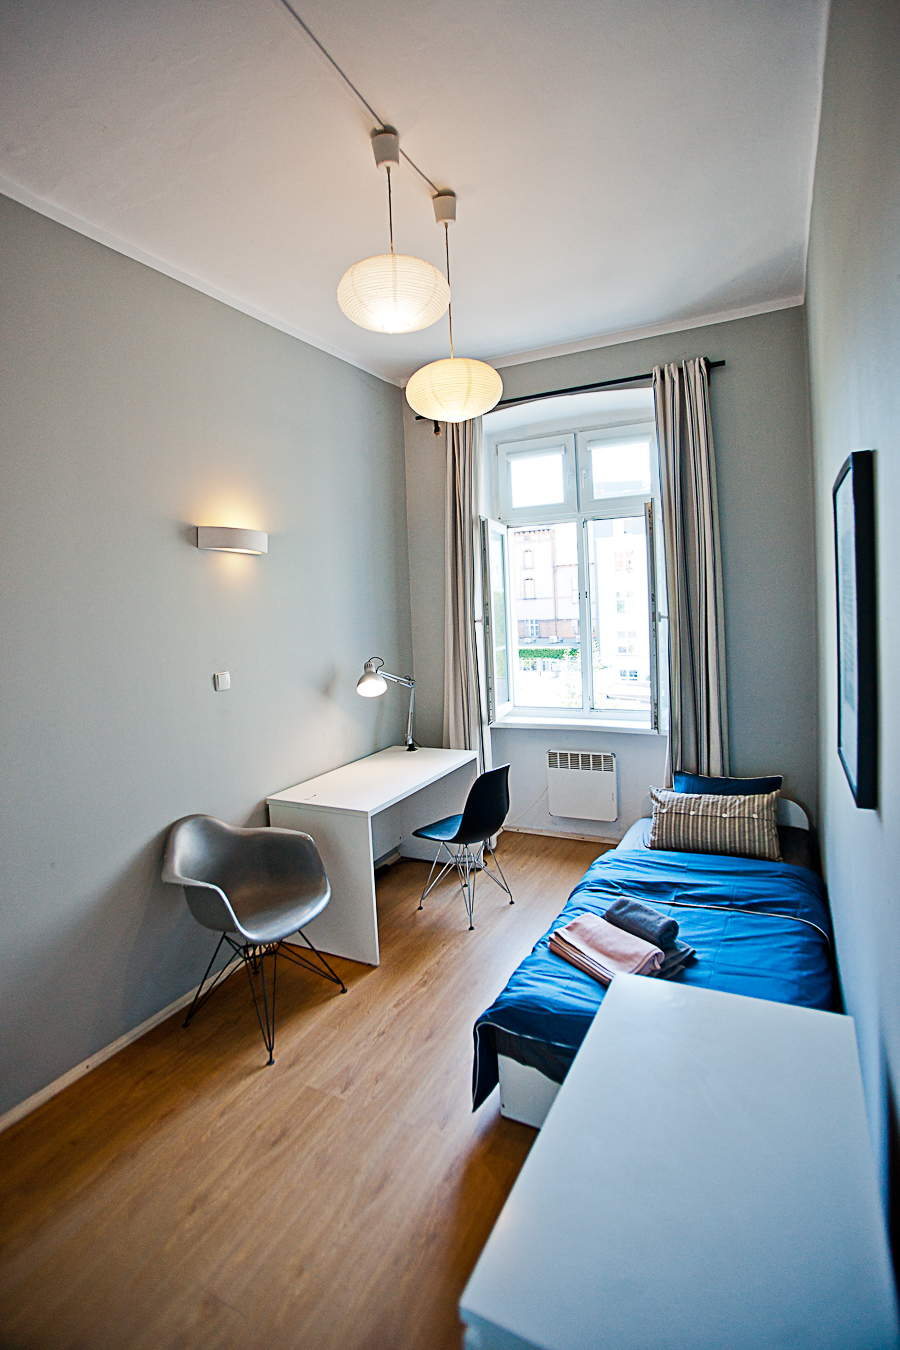 well designed room of residence located in the center of Wroclaw